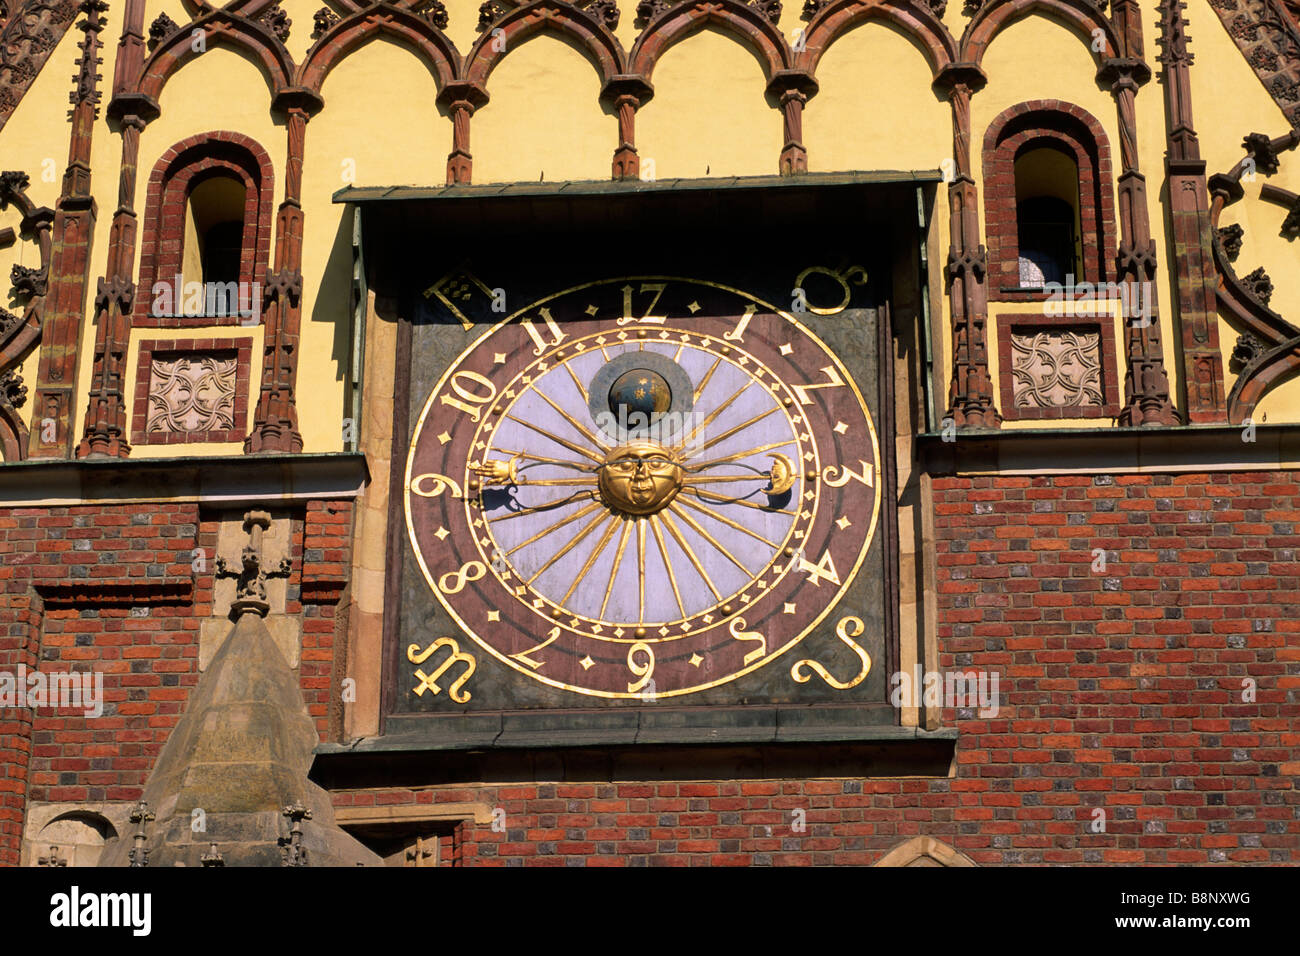 Poland, Wroclaw, Rynek, market square, old town hall, ancient clock (AD 1580) Stock Photo